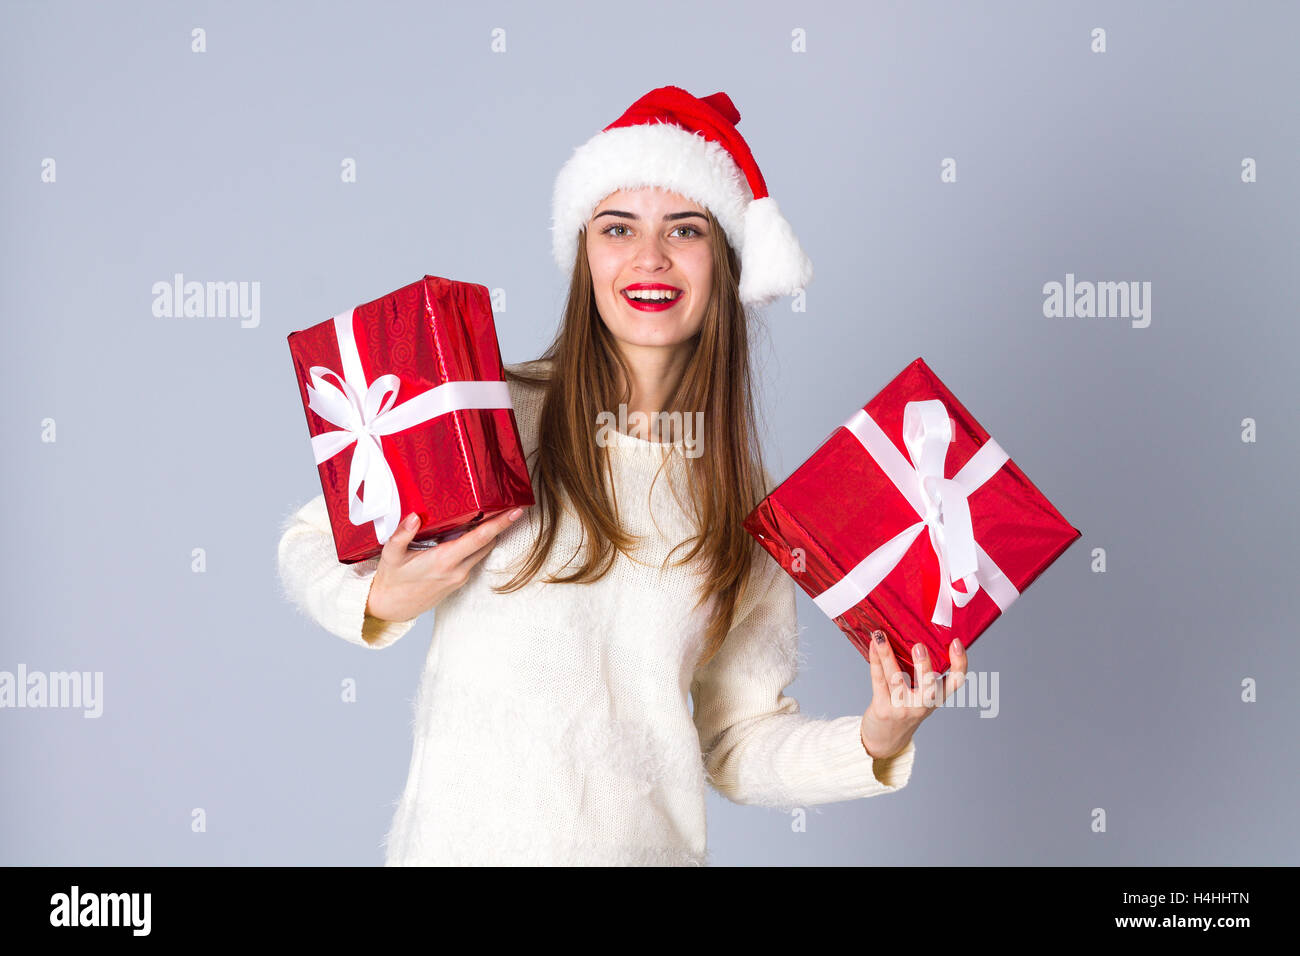 Woman in red christmas hat holding presents Stock Photo